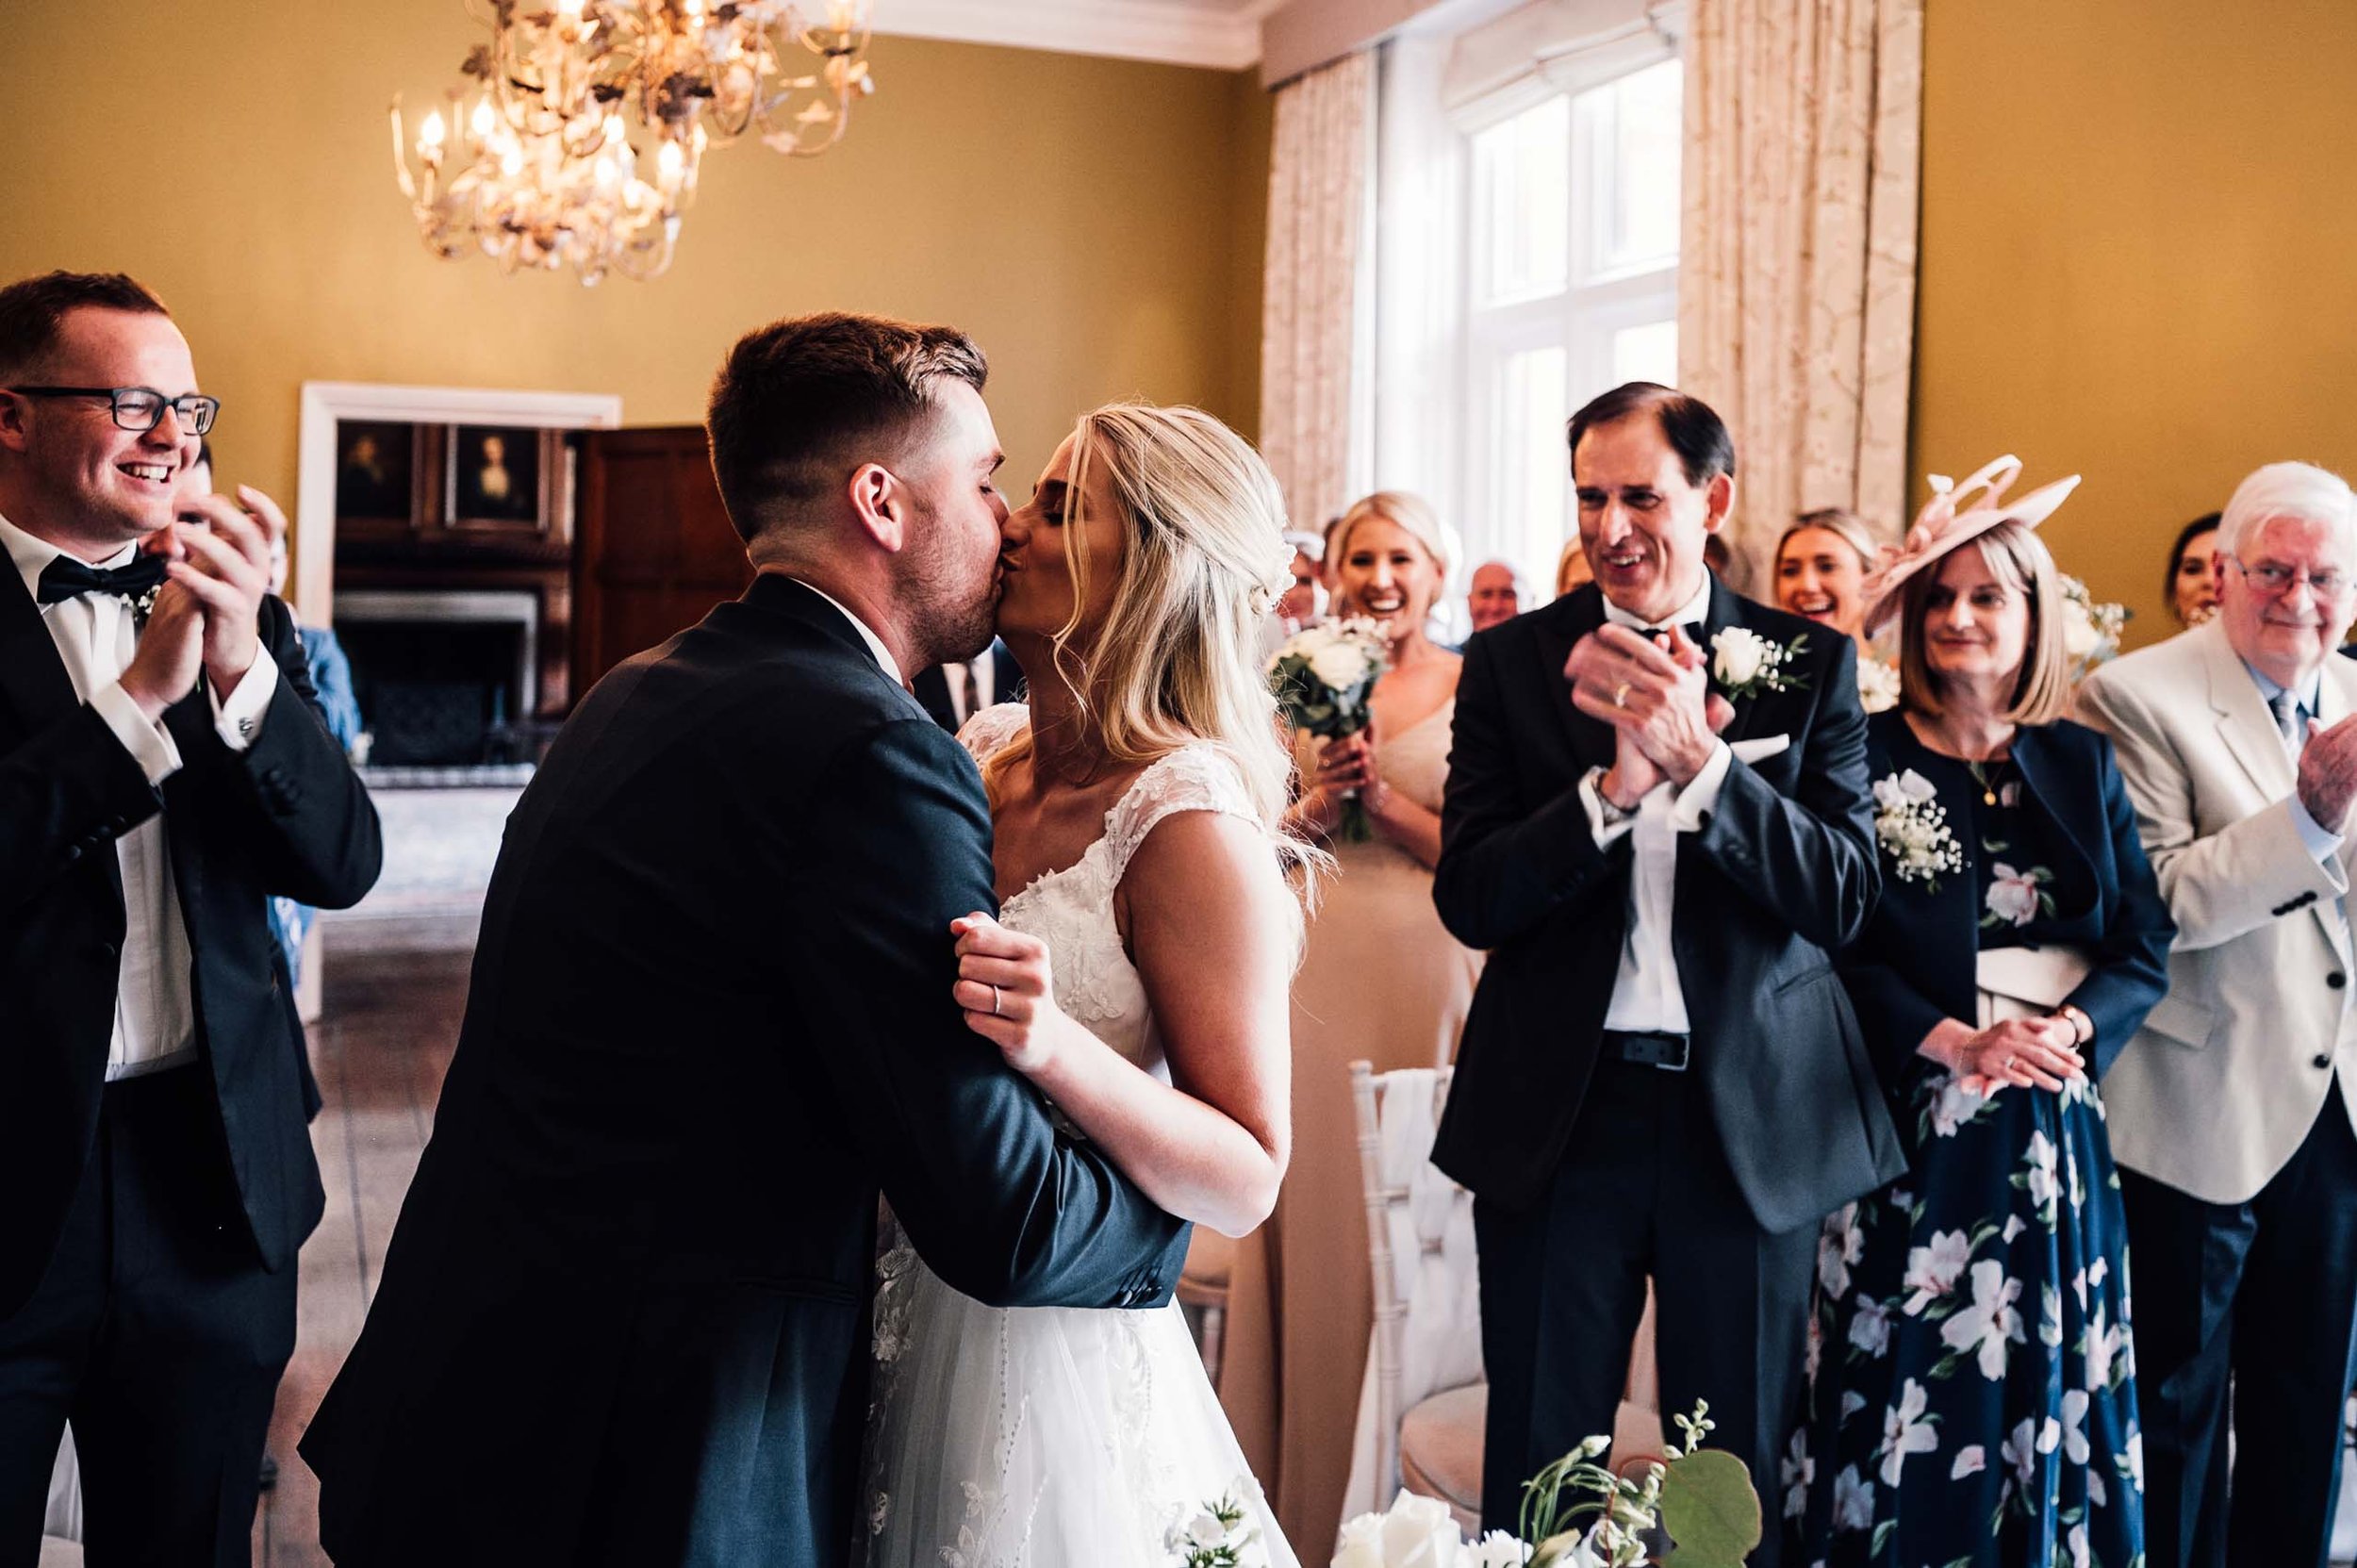 Bride and groom kissing during their wedding ceremony at Hodsock Priory